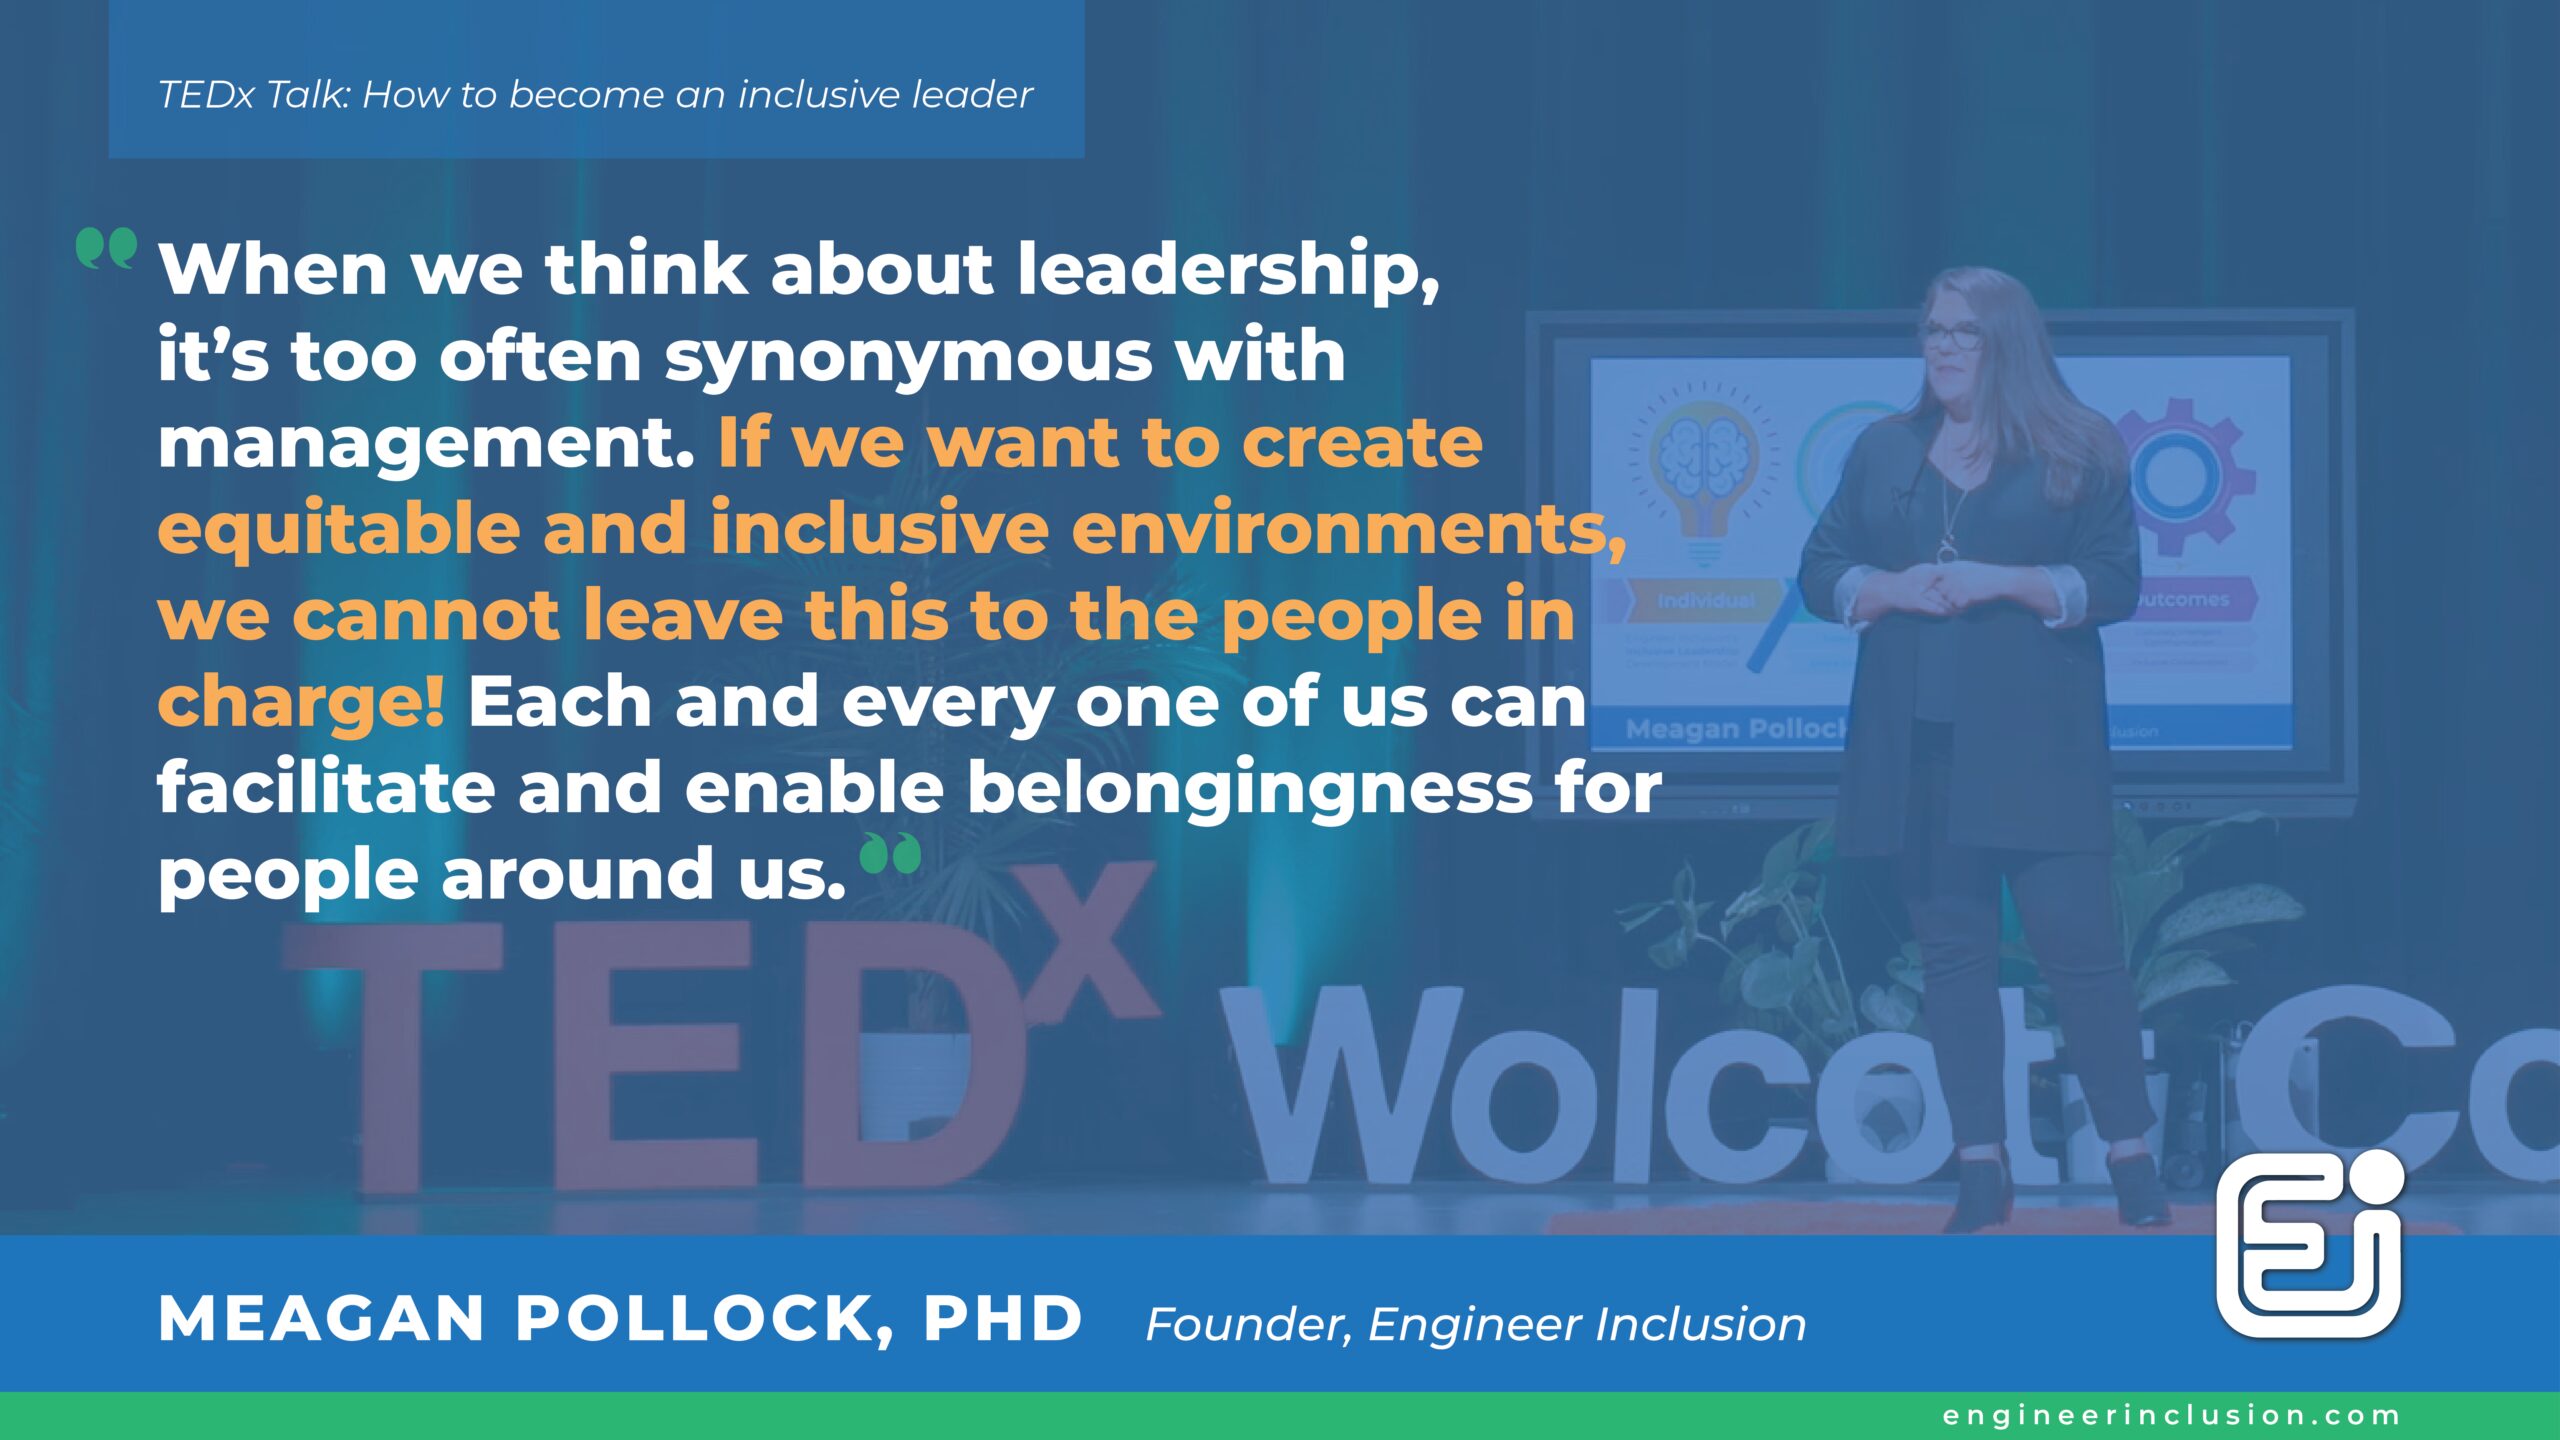 When we think about leadership, it’s too often synonymous with management. If we want to create equitable and inclusive environments, we cannot leave this to the people in charge! Each and every one of us can facilitate and enable belongingness for people around us. Dr. Meagan Pollock